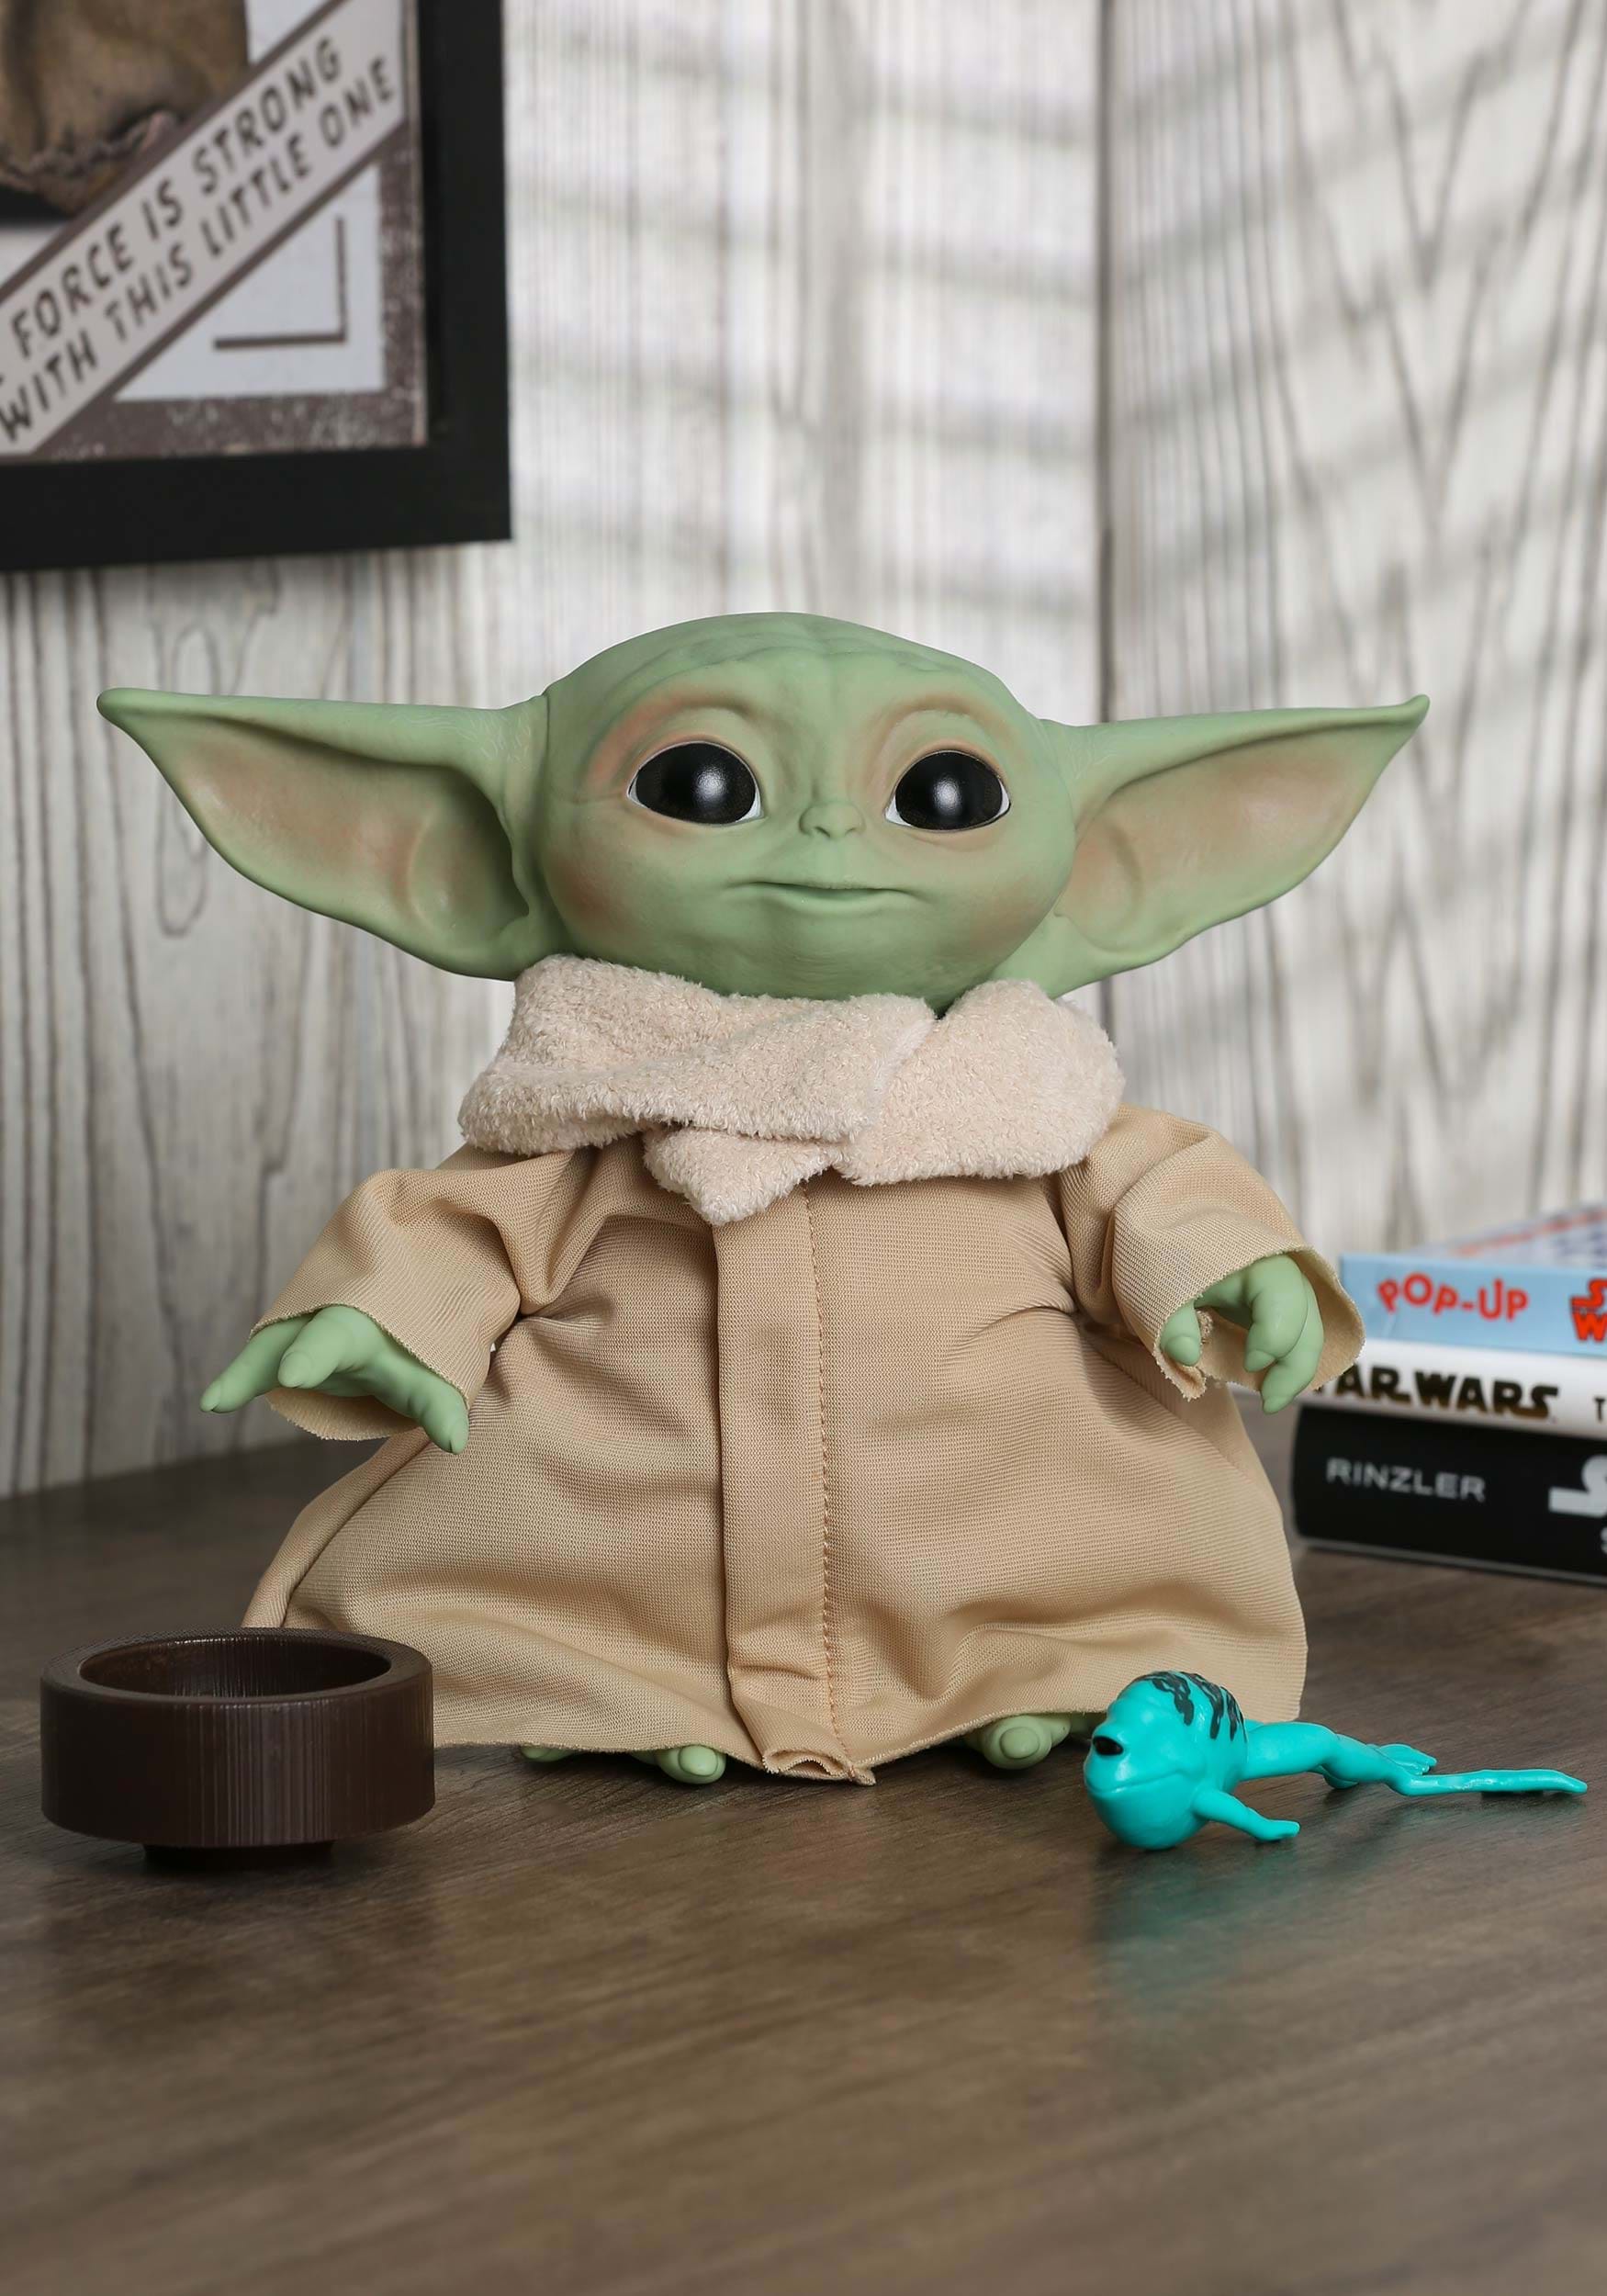 Star Wars Baby Yoda Glasses for Kids with protective pouch - Grogu  sunglasses for kids